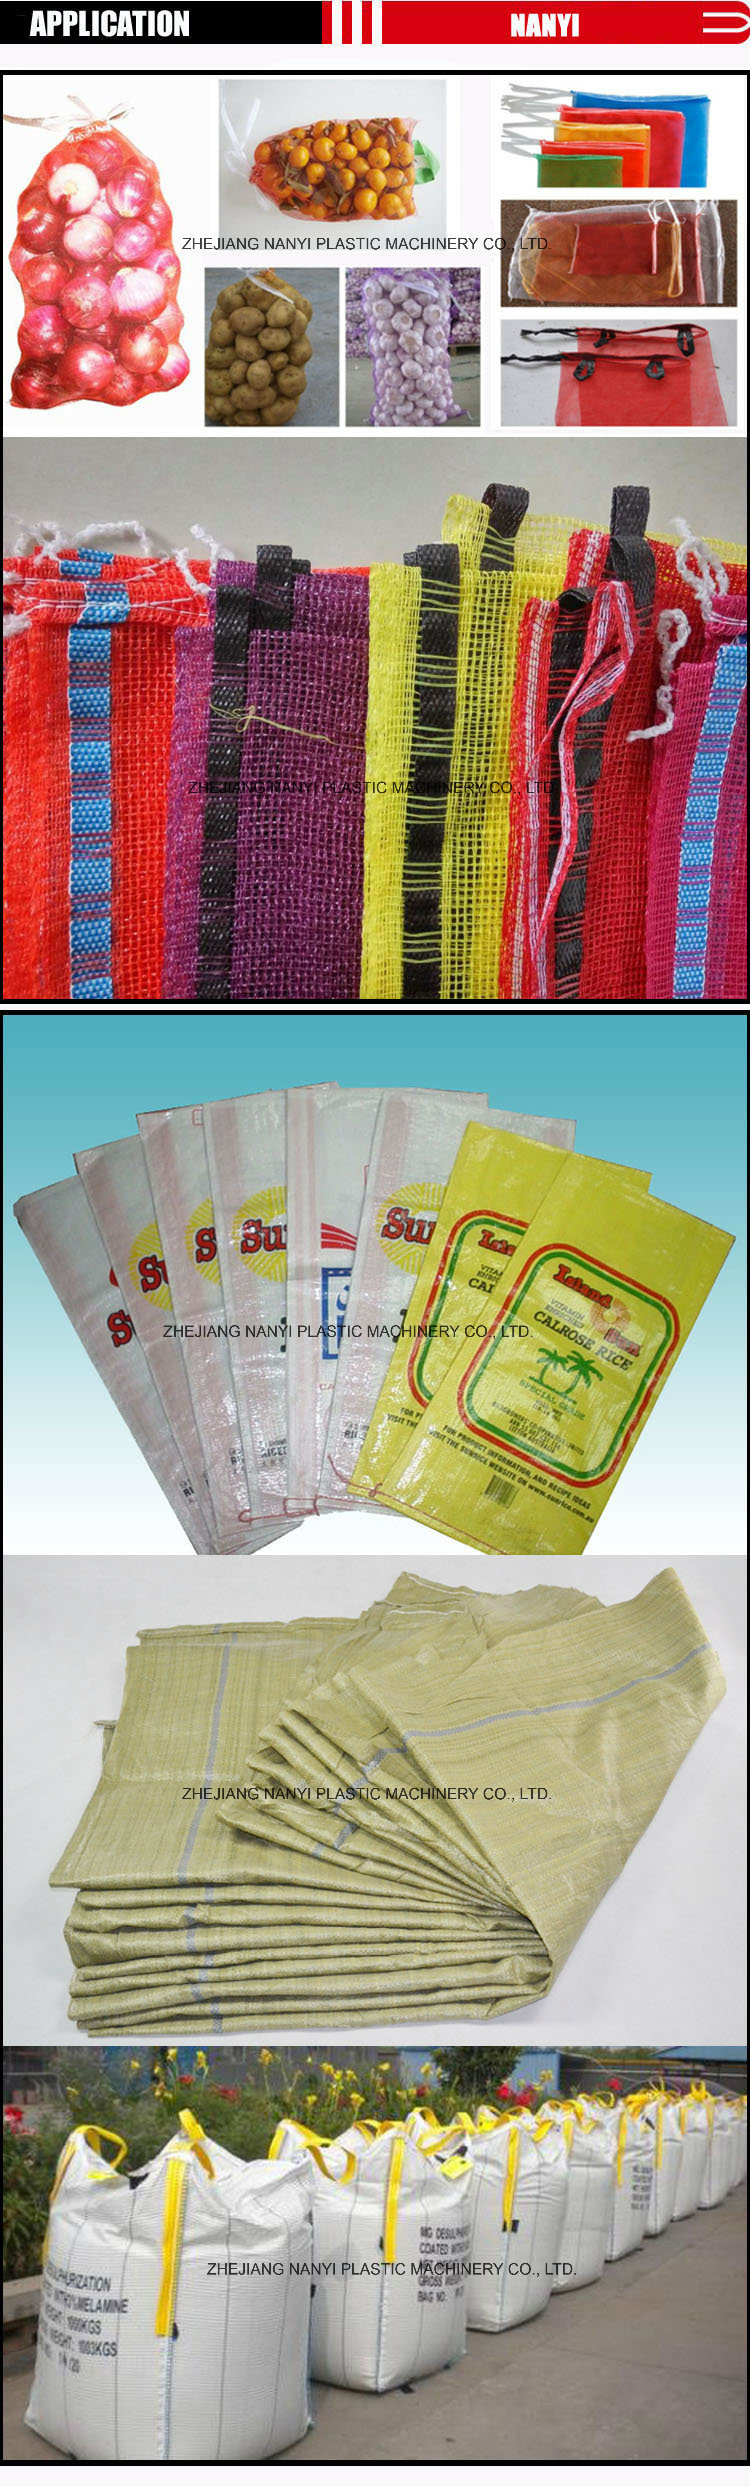 PP Plastic Woven Bag Automatic Cutting and Sewing Machine